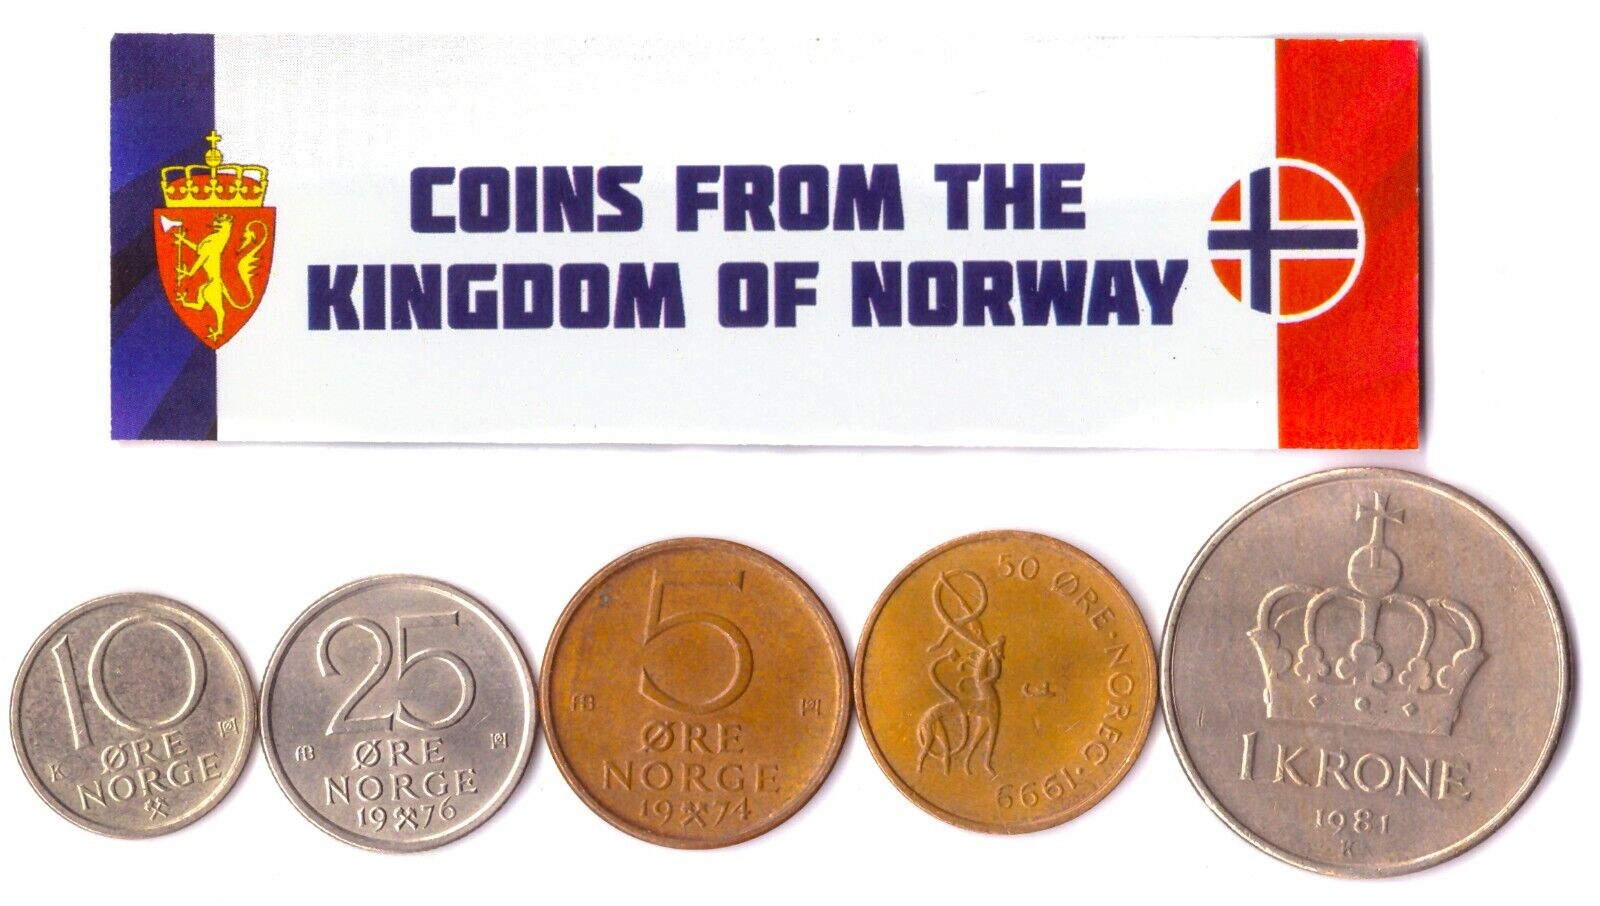 5 COINS FROM NORWAY. OLD SCANDINAVIAN CURRENCY. VALUABLE MONEY (ORE, KRONE 1958) Без бренда - фотография #3